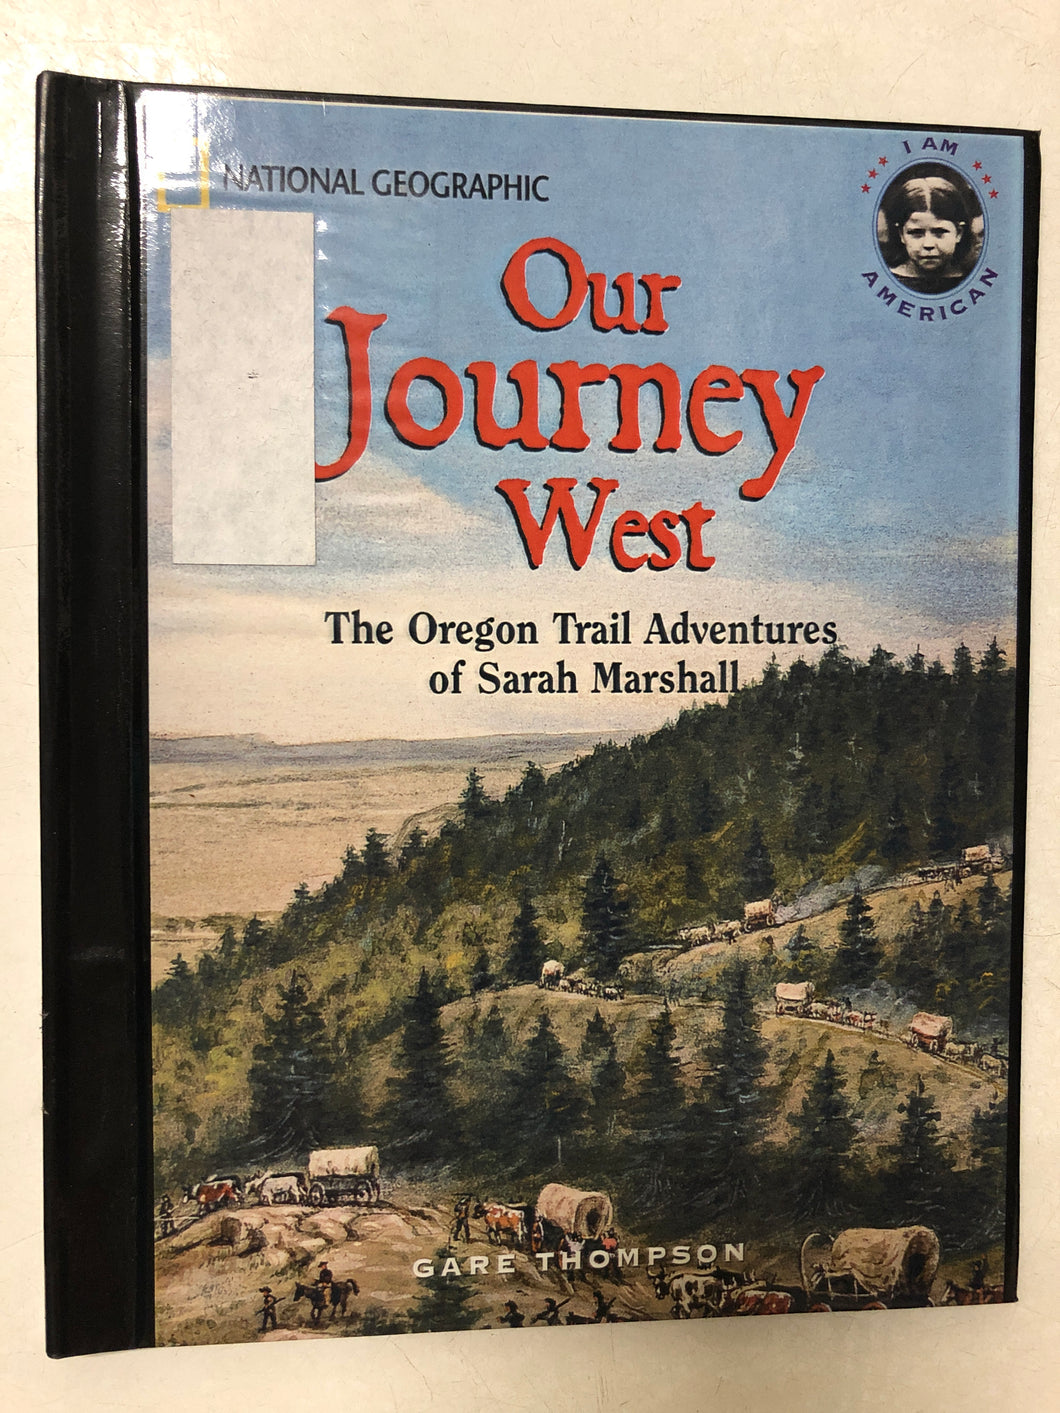 Our Journey West The Oregon Trail Adventures is Sarah Marshall - Slick Cat Books 